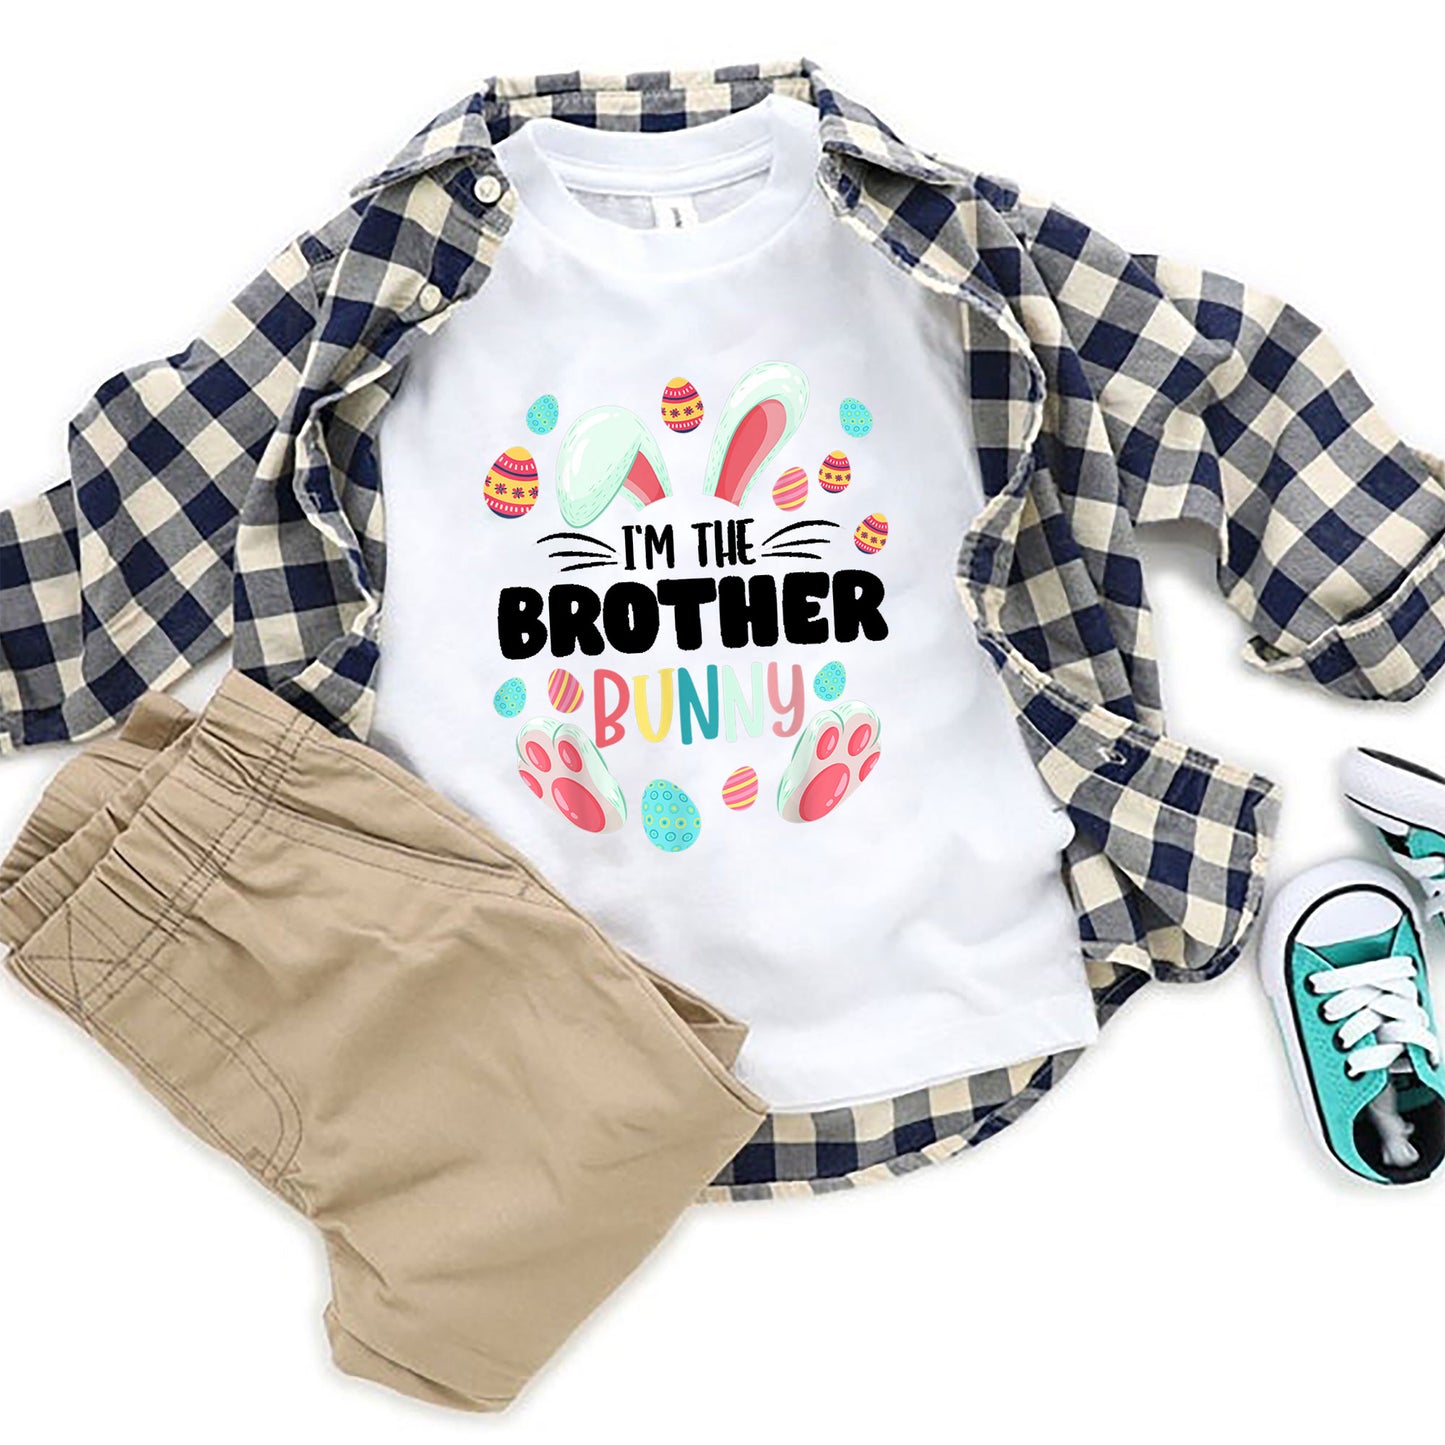 Big Brother Easter shirt, Boys Easter Shirt, Easter Gifts For Kids, Easter Gifts For Toddlers, Easter Gifts For Boys